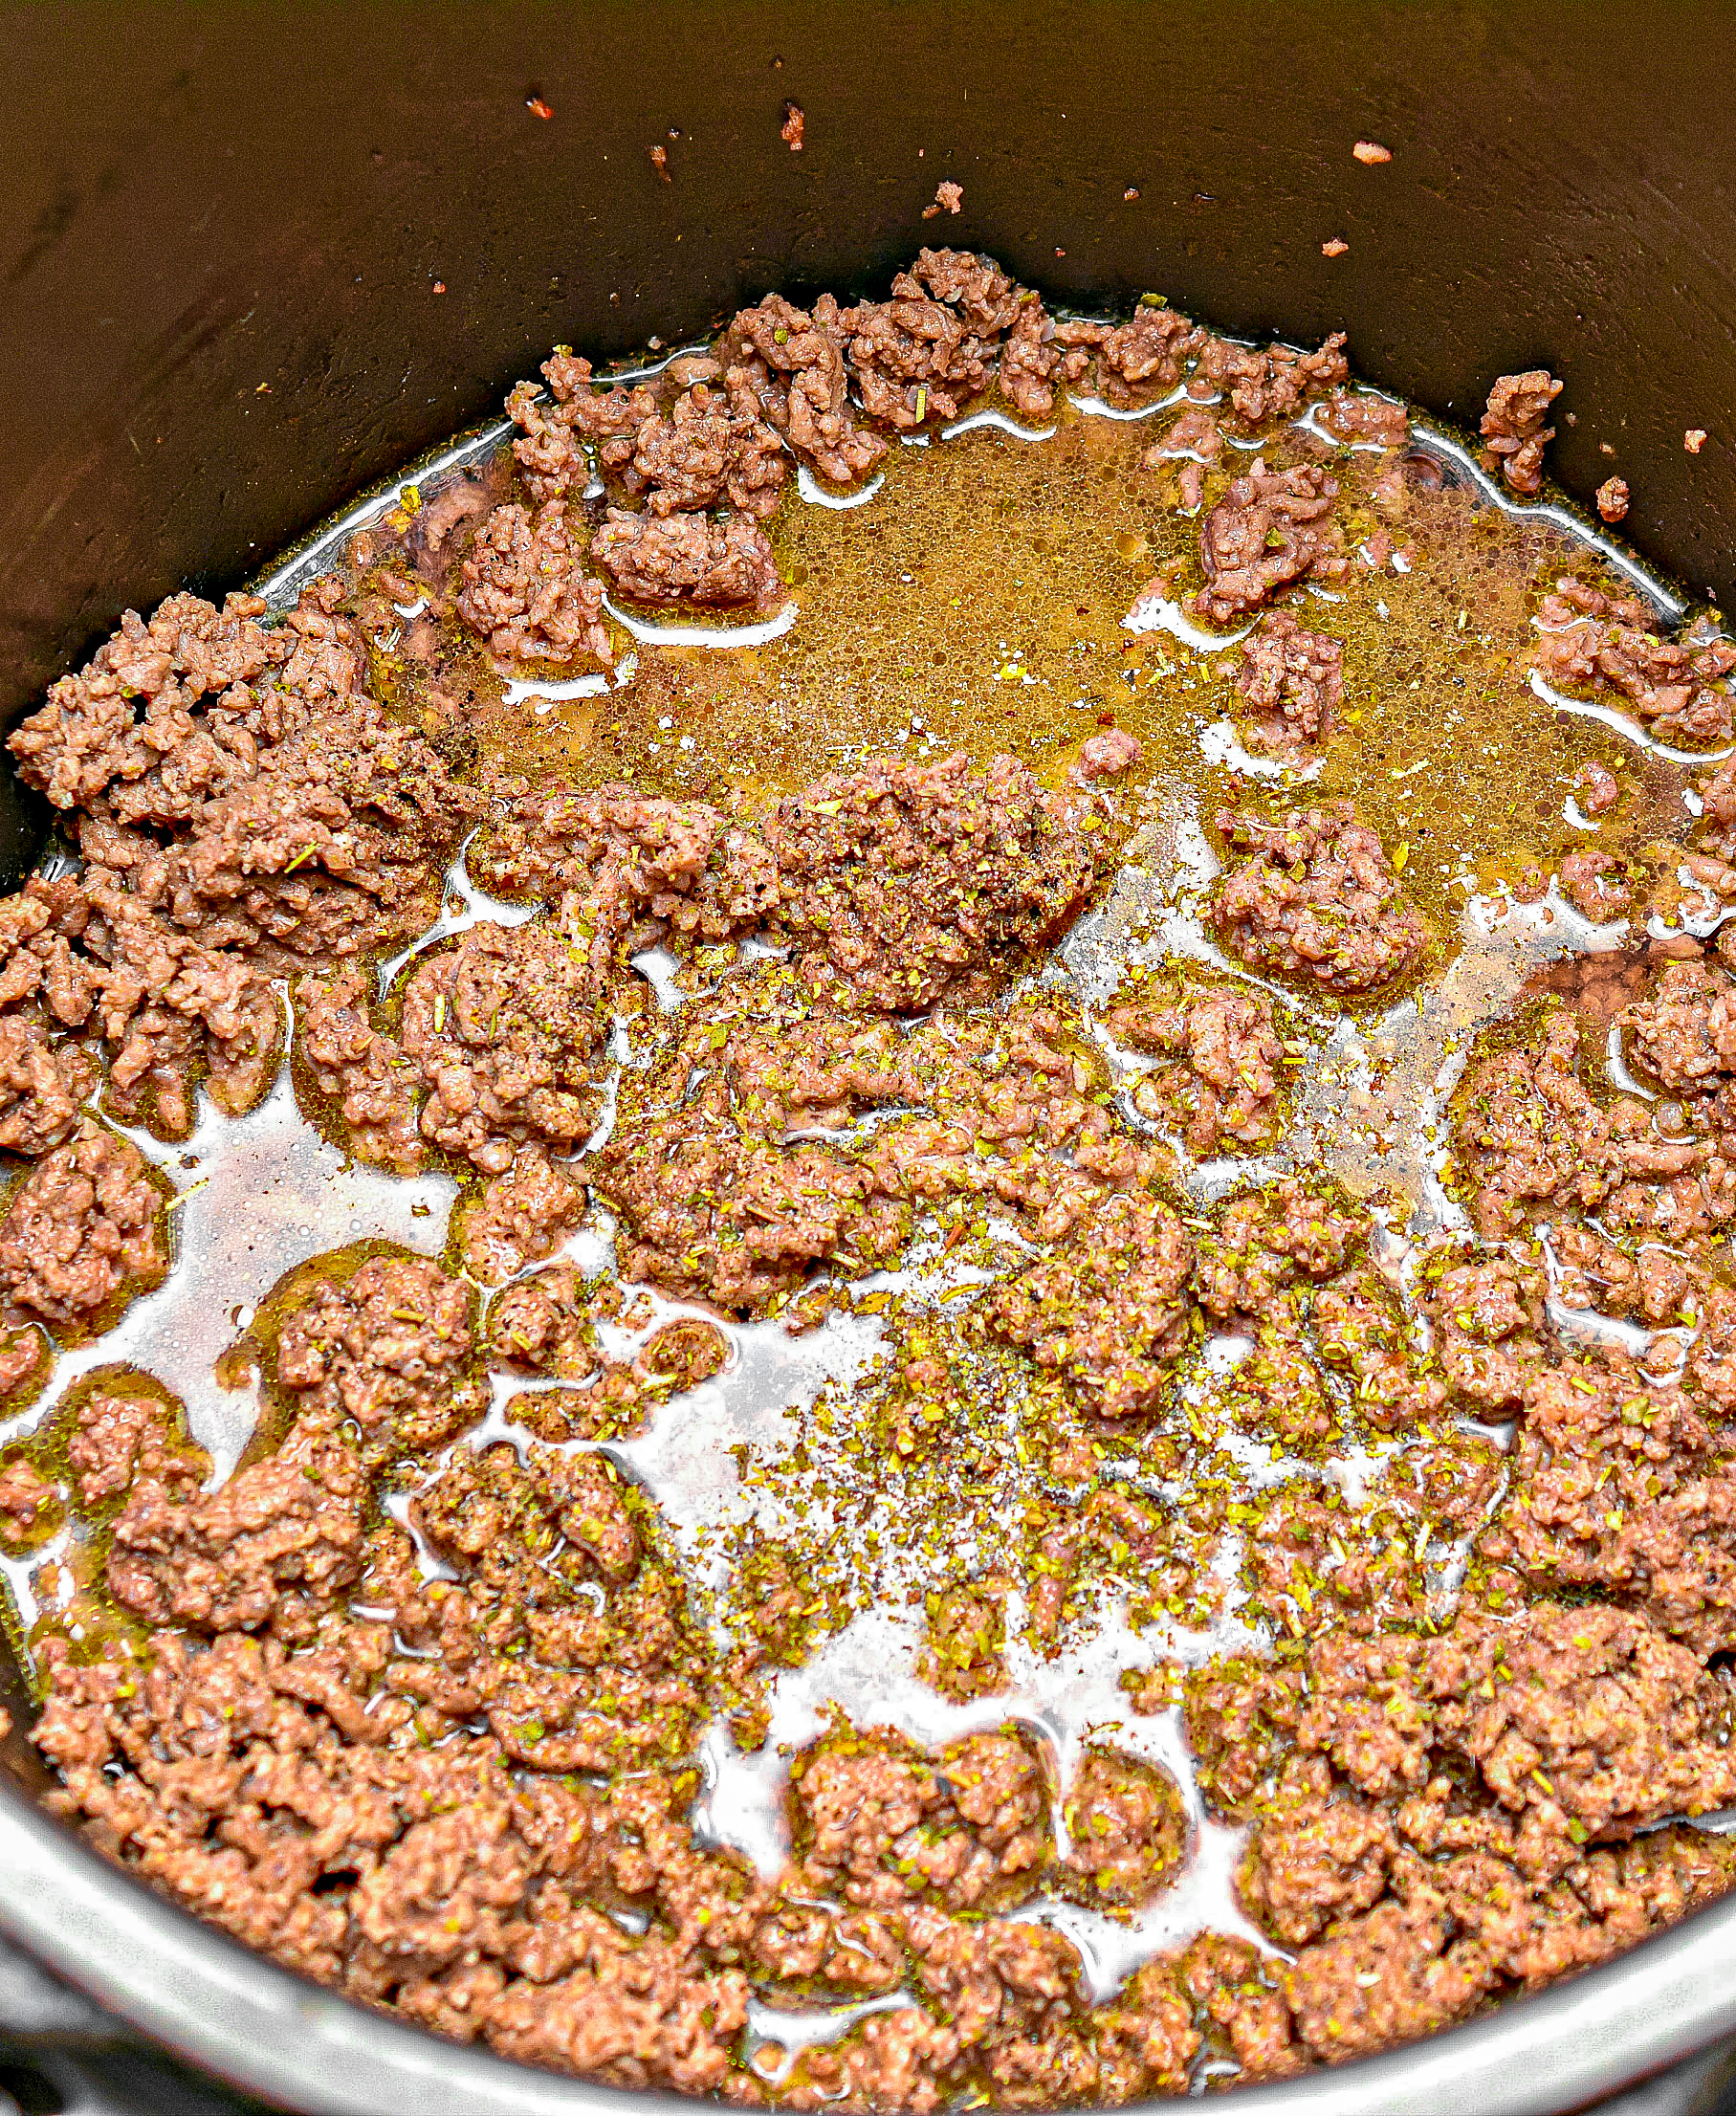 Set the Instant Pot to saute, and saute the ground beef until completely browned, and then drain thoroughly.